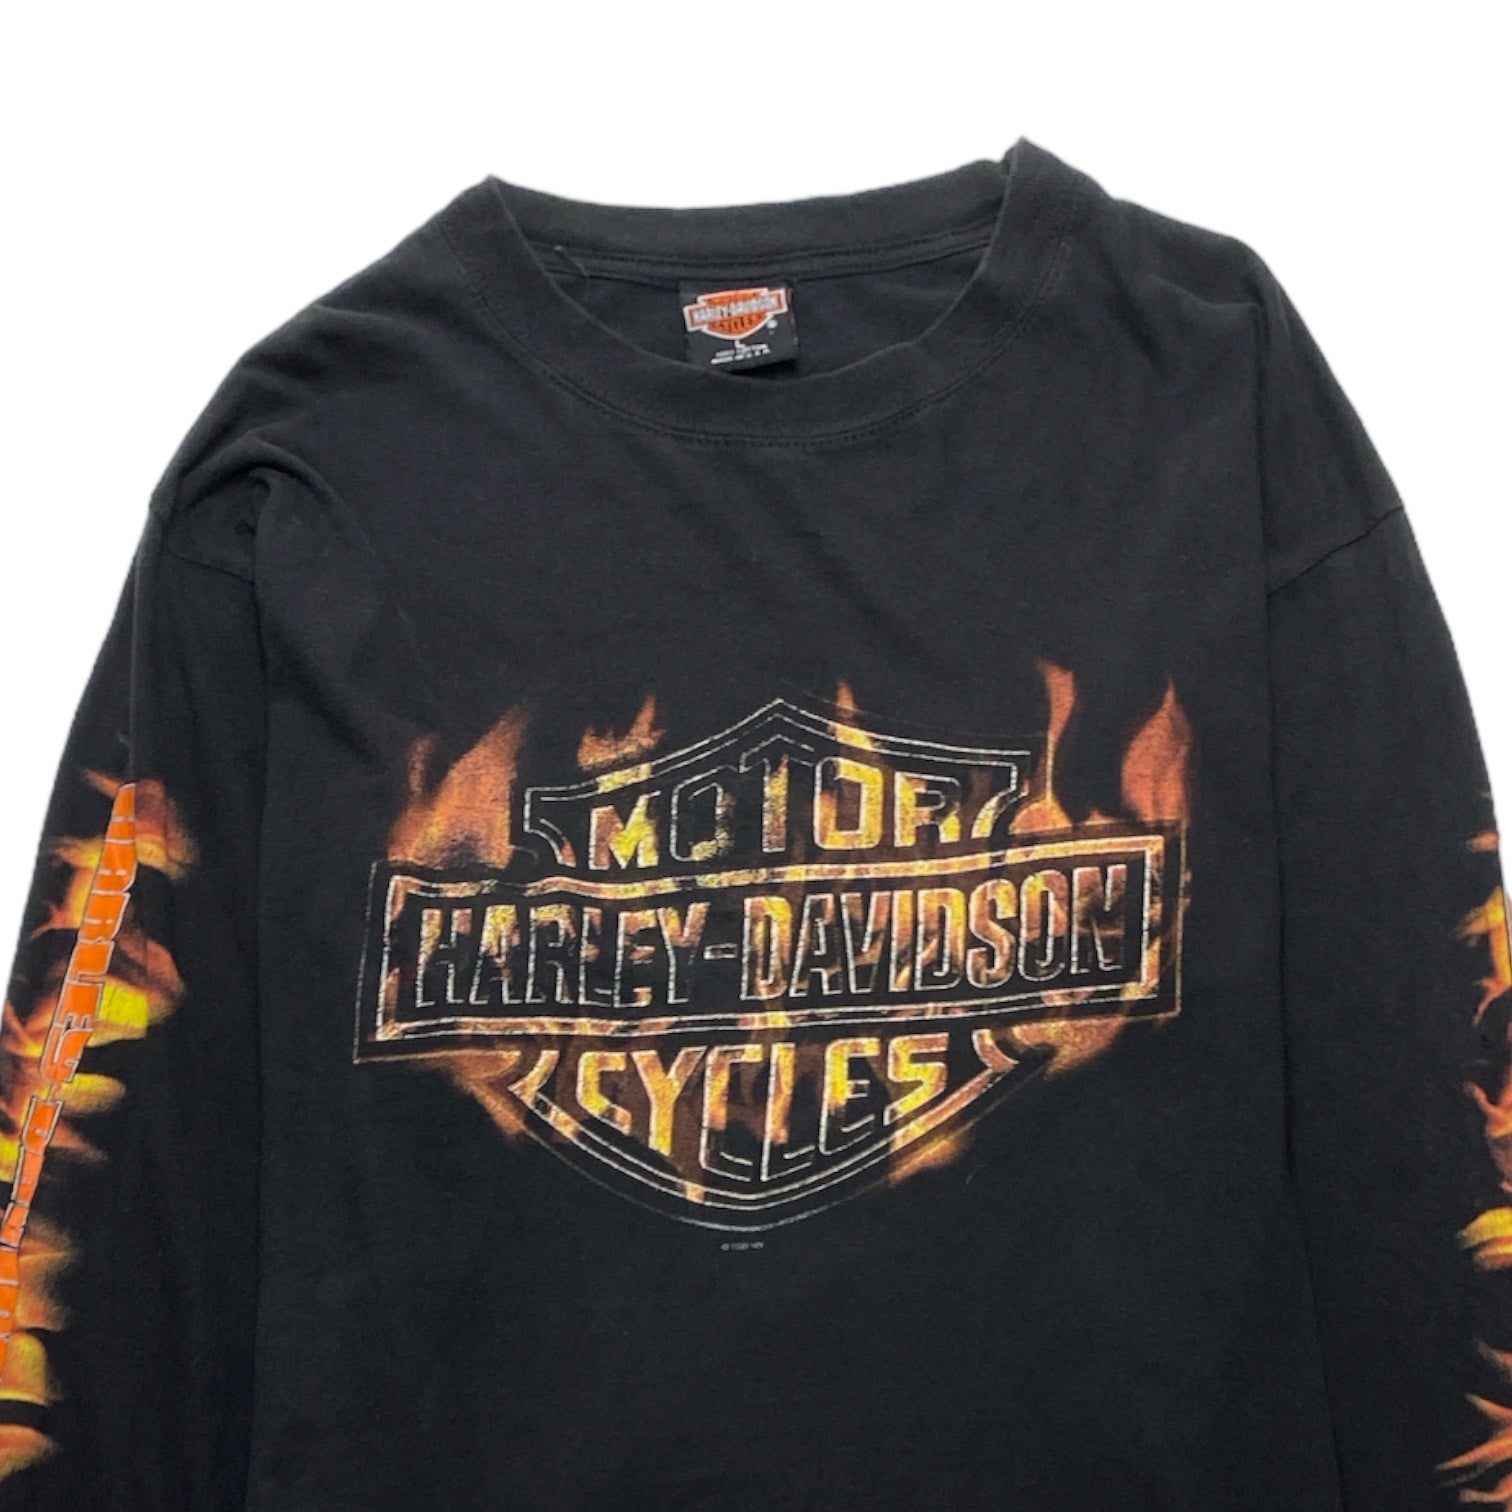 MOTOR HARLEY-DAVIDSON CYCLES FLAME FIRE LOGO L/S Tee Made in USA